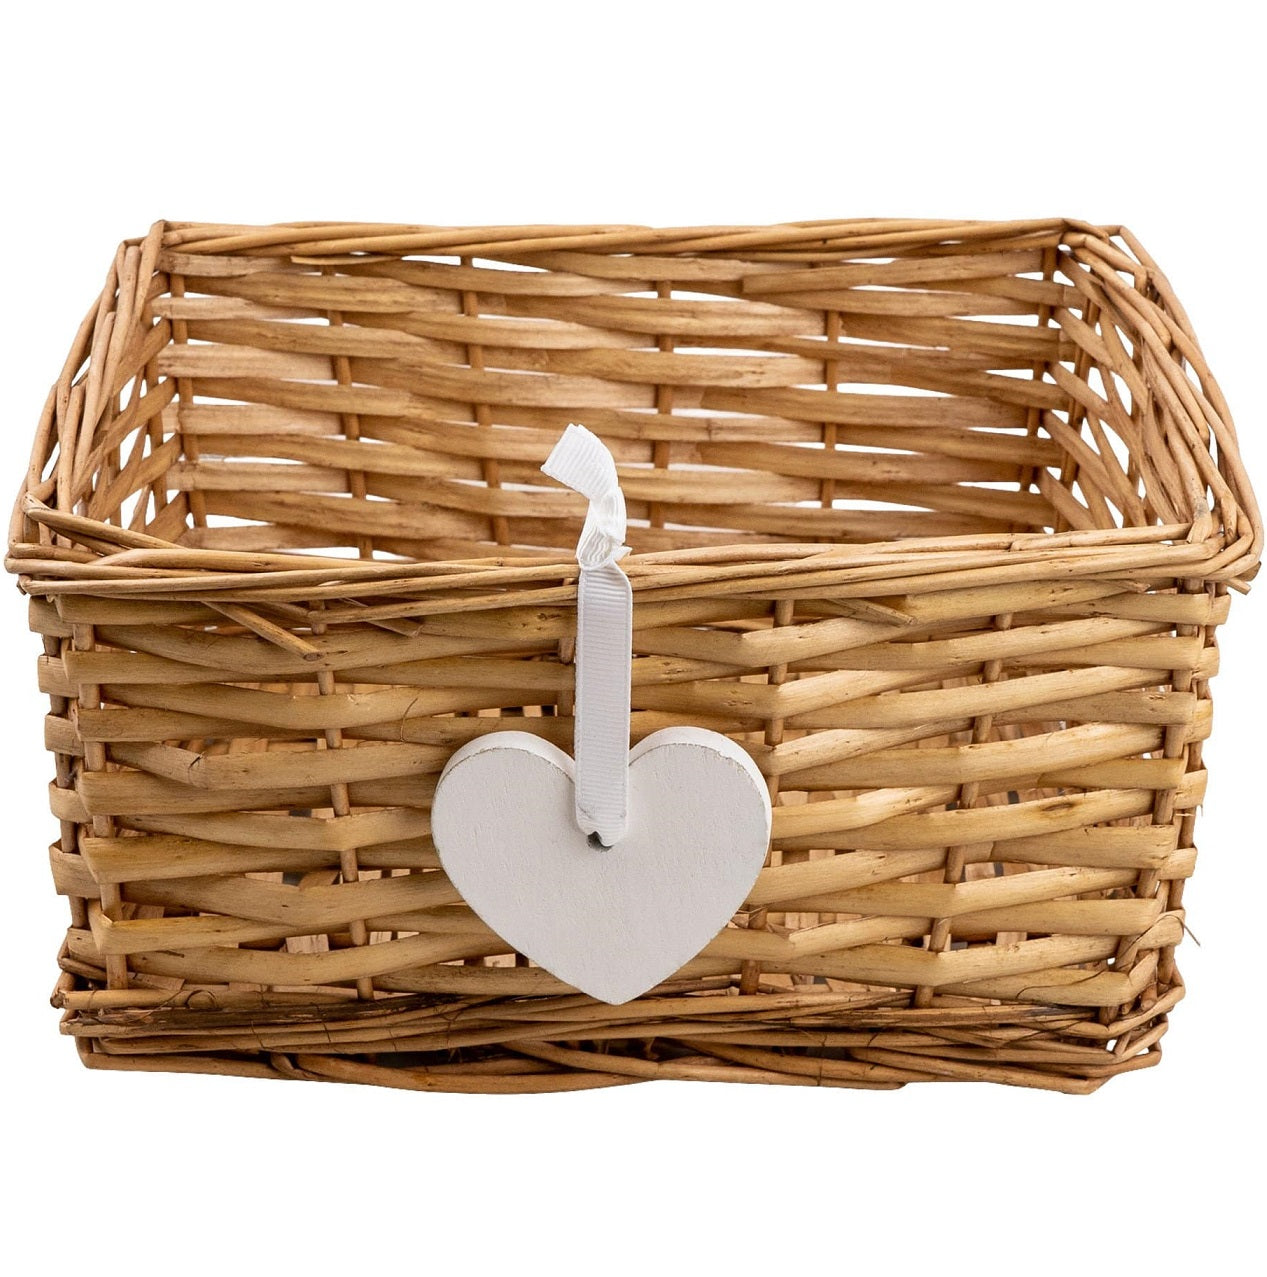 Brown Wicker Basket with White Hanging Heart